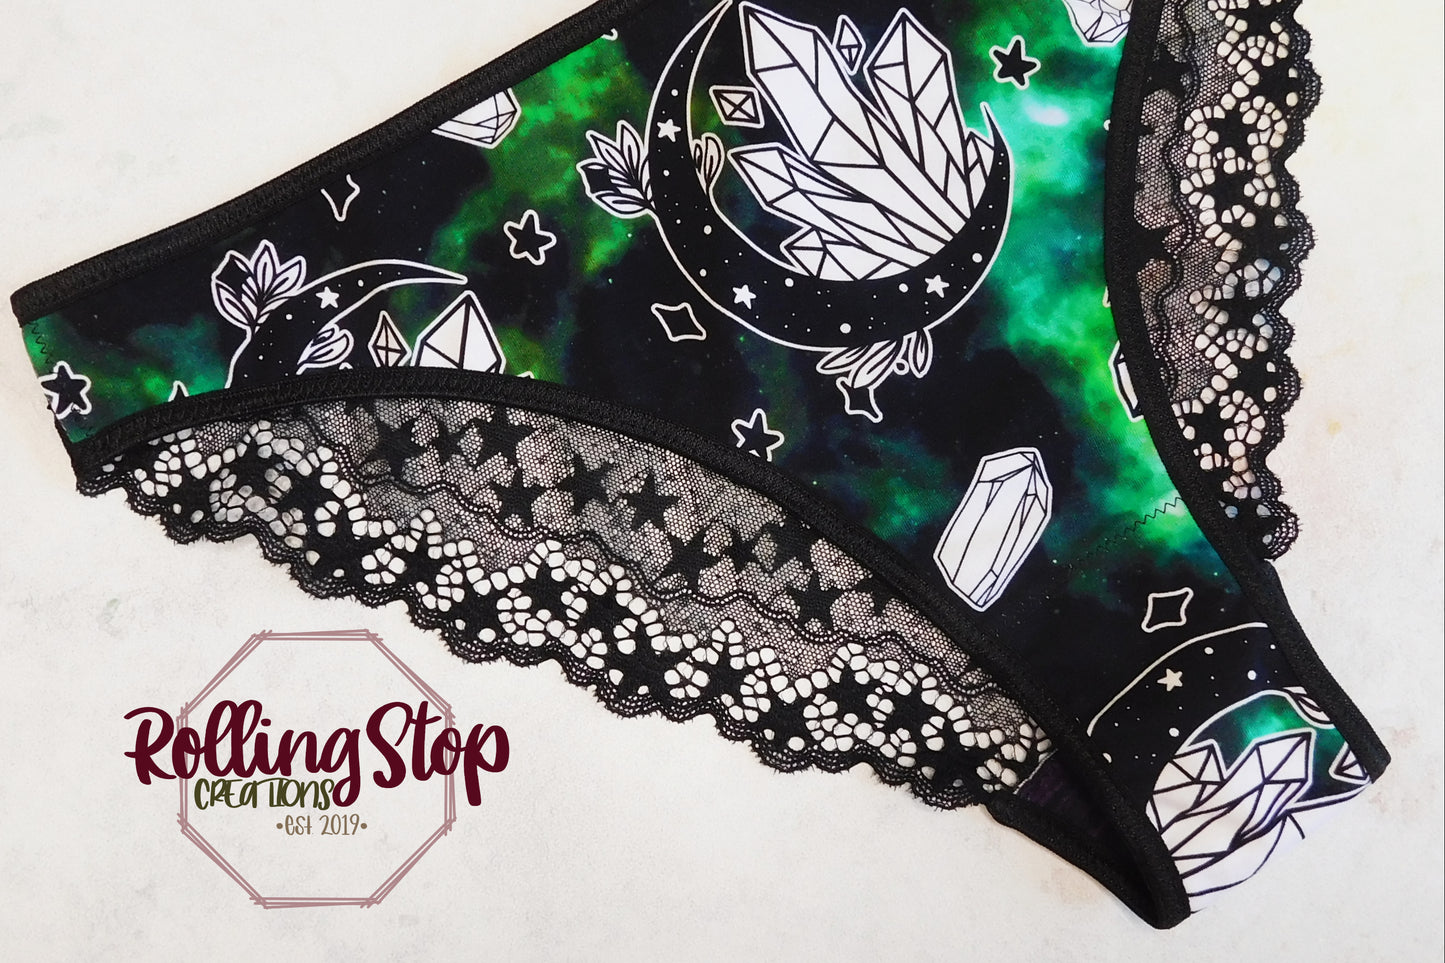 Absinthe Crystals Comfy Bra by Rolling Stop Creations sold by Rolling Stop Creations 